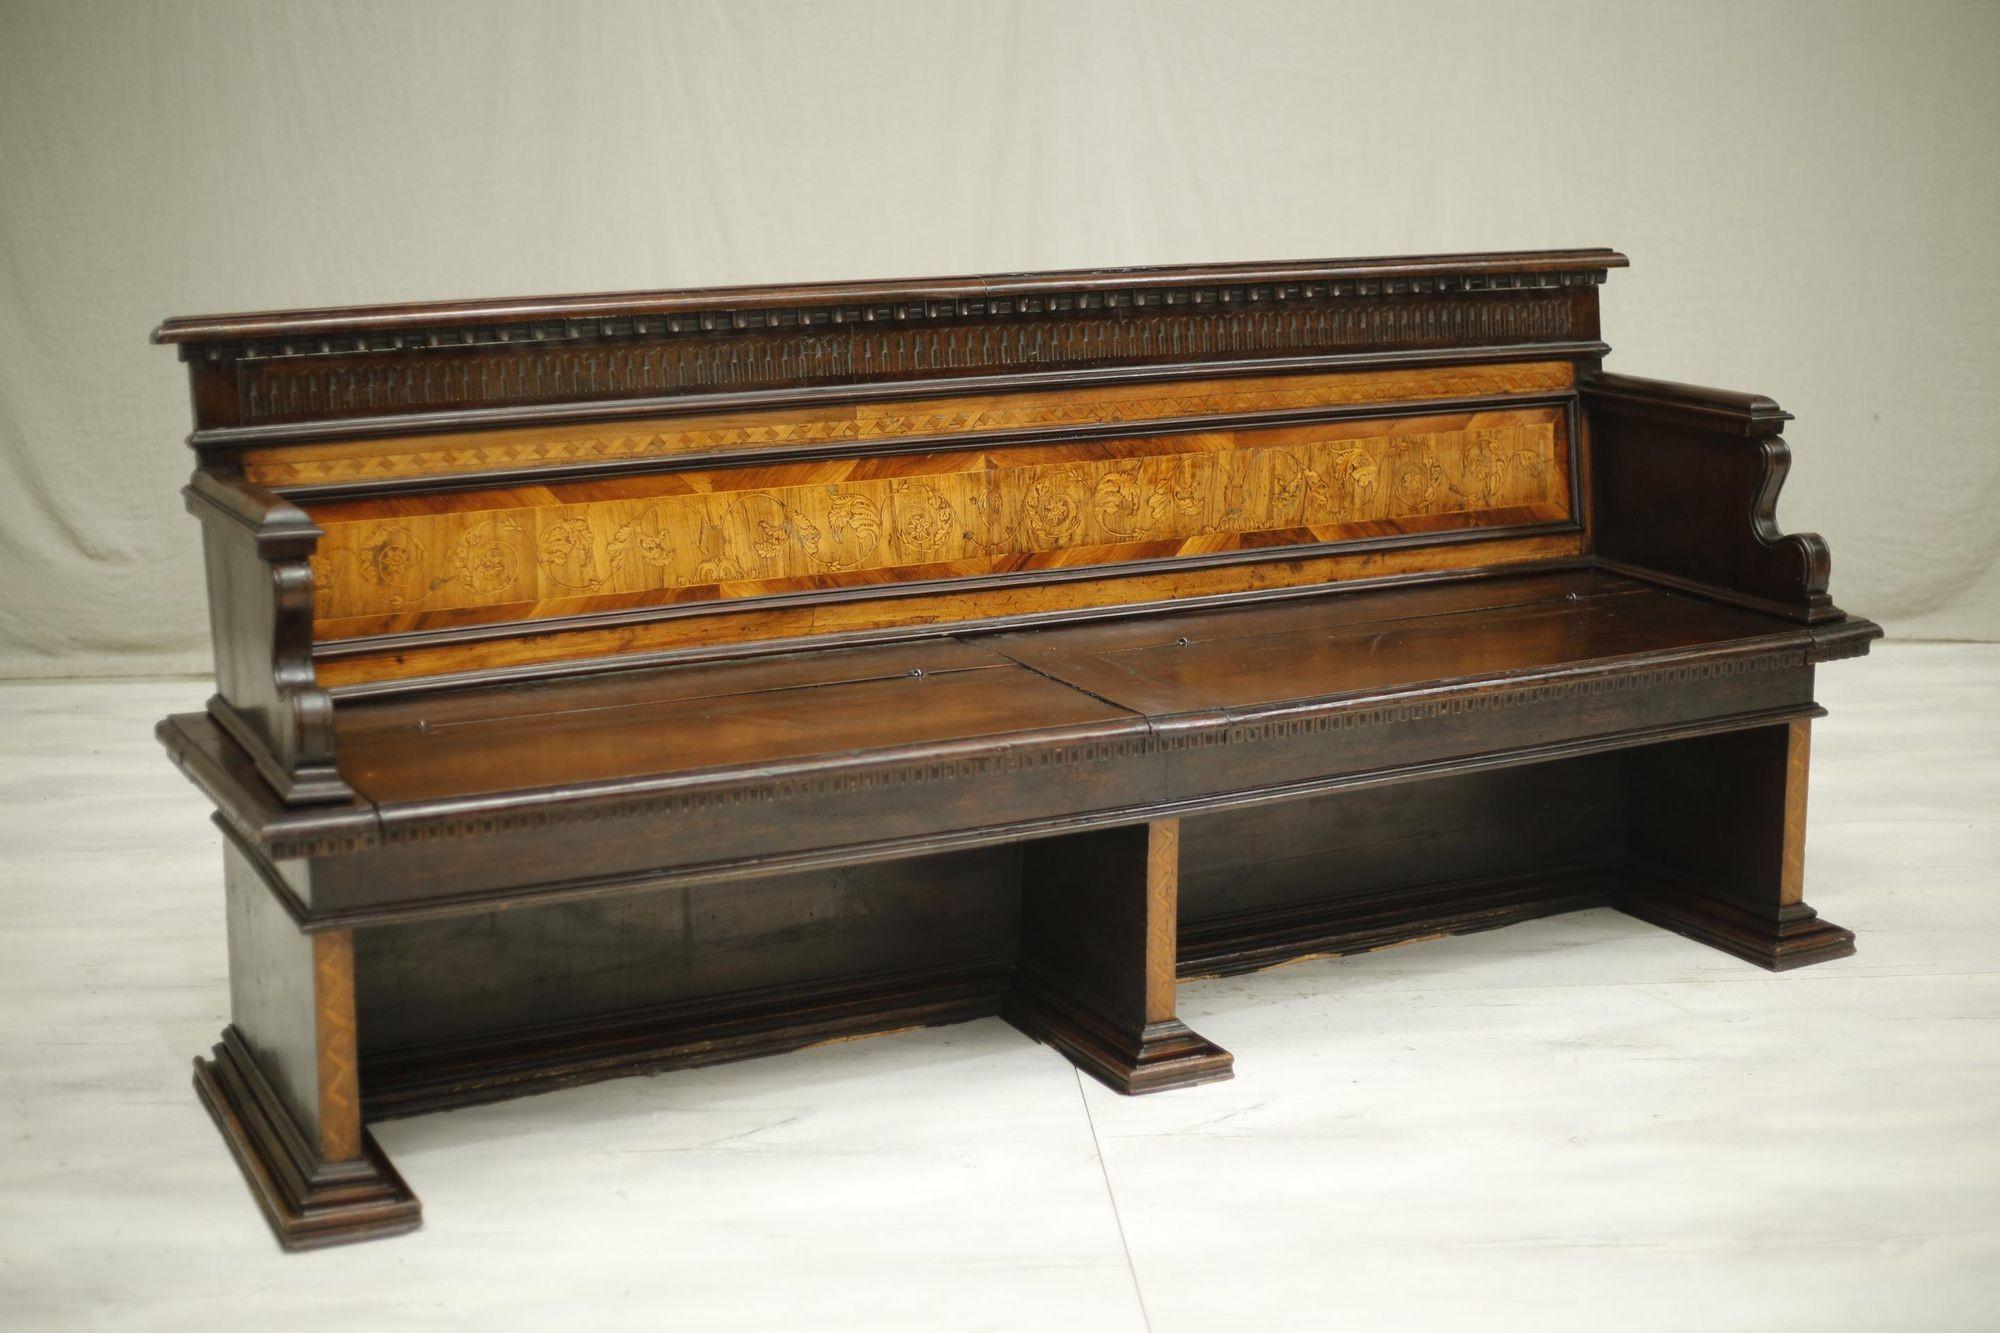 This is a very nice quality 19th century Italian bench. The penwork detail in the back is such a wonderfukl detail and a great contrast to the dark finish to the body of the piece. The details continue to the leg fronts which is a great touch. The